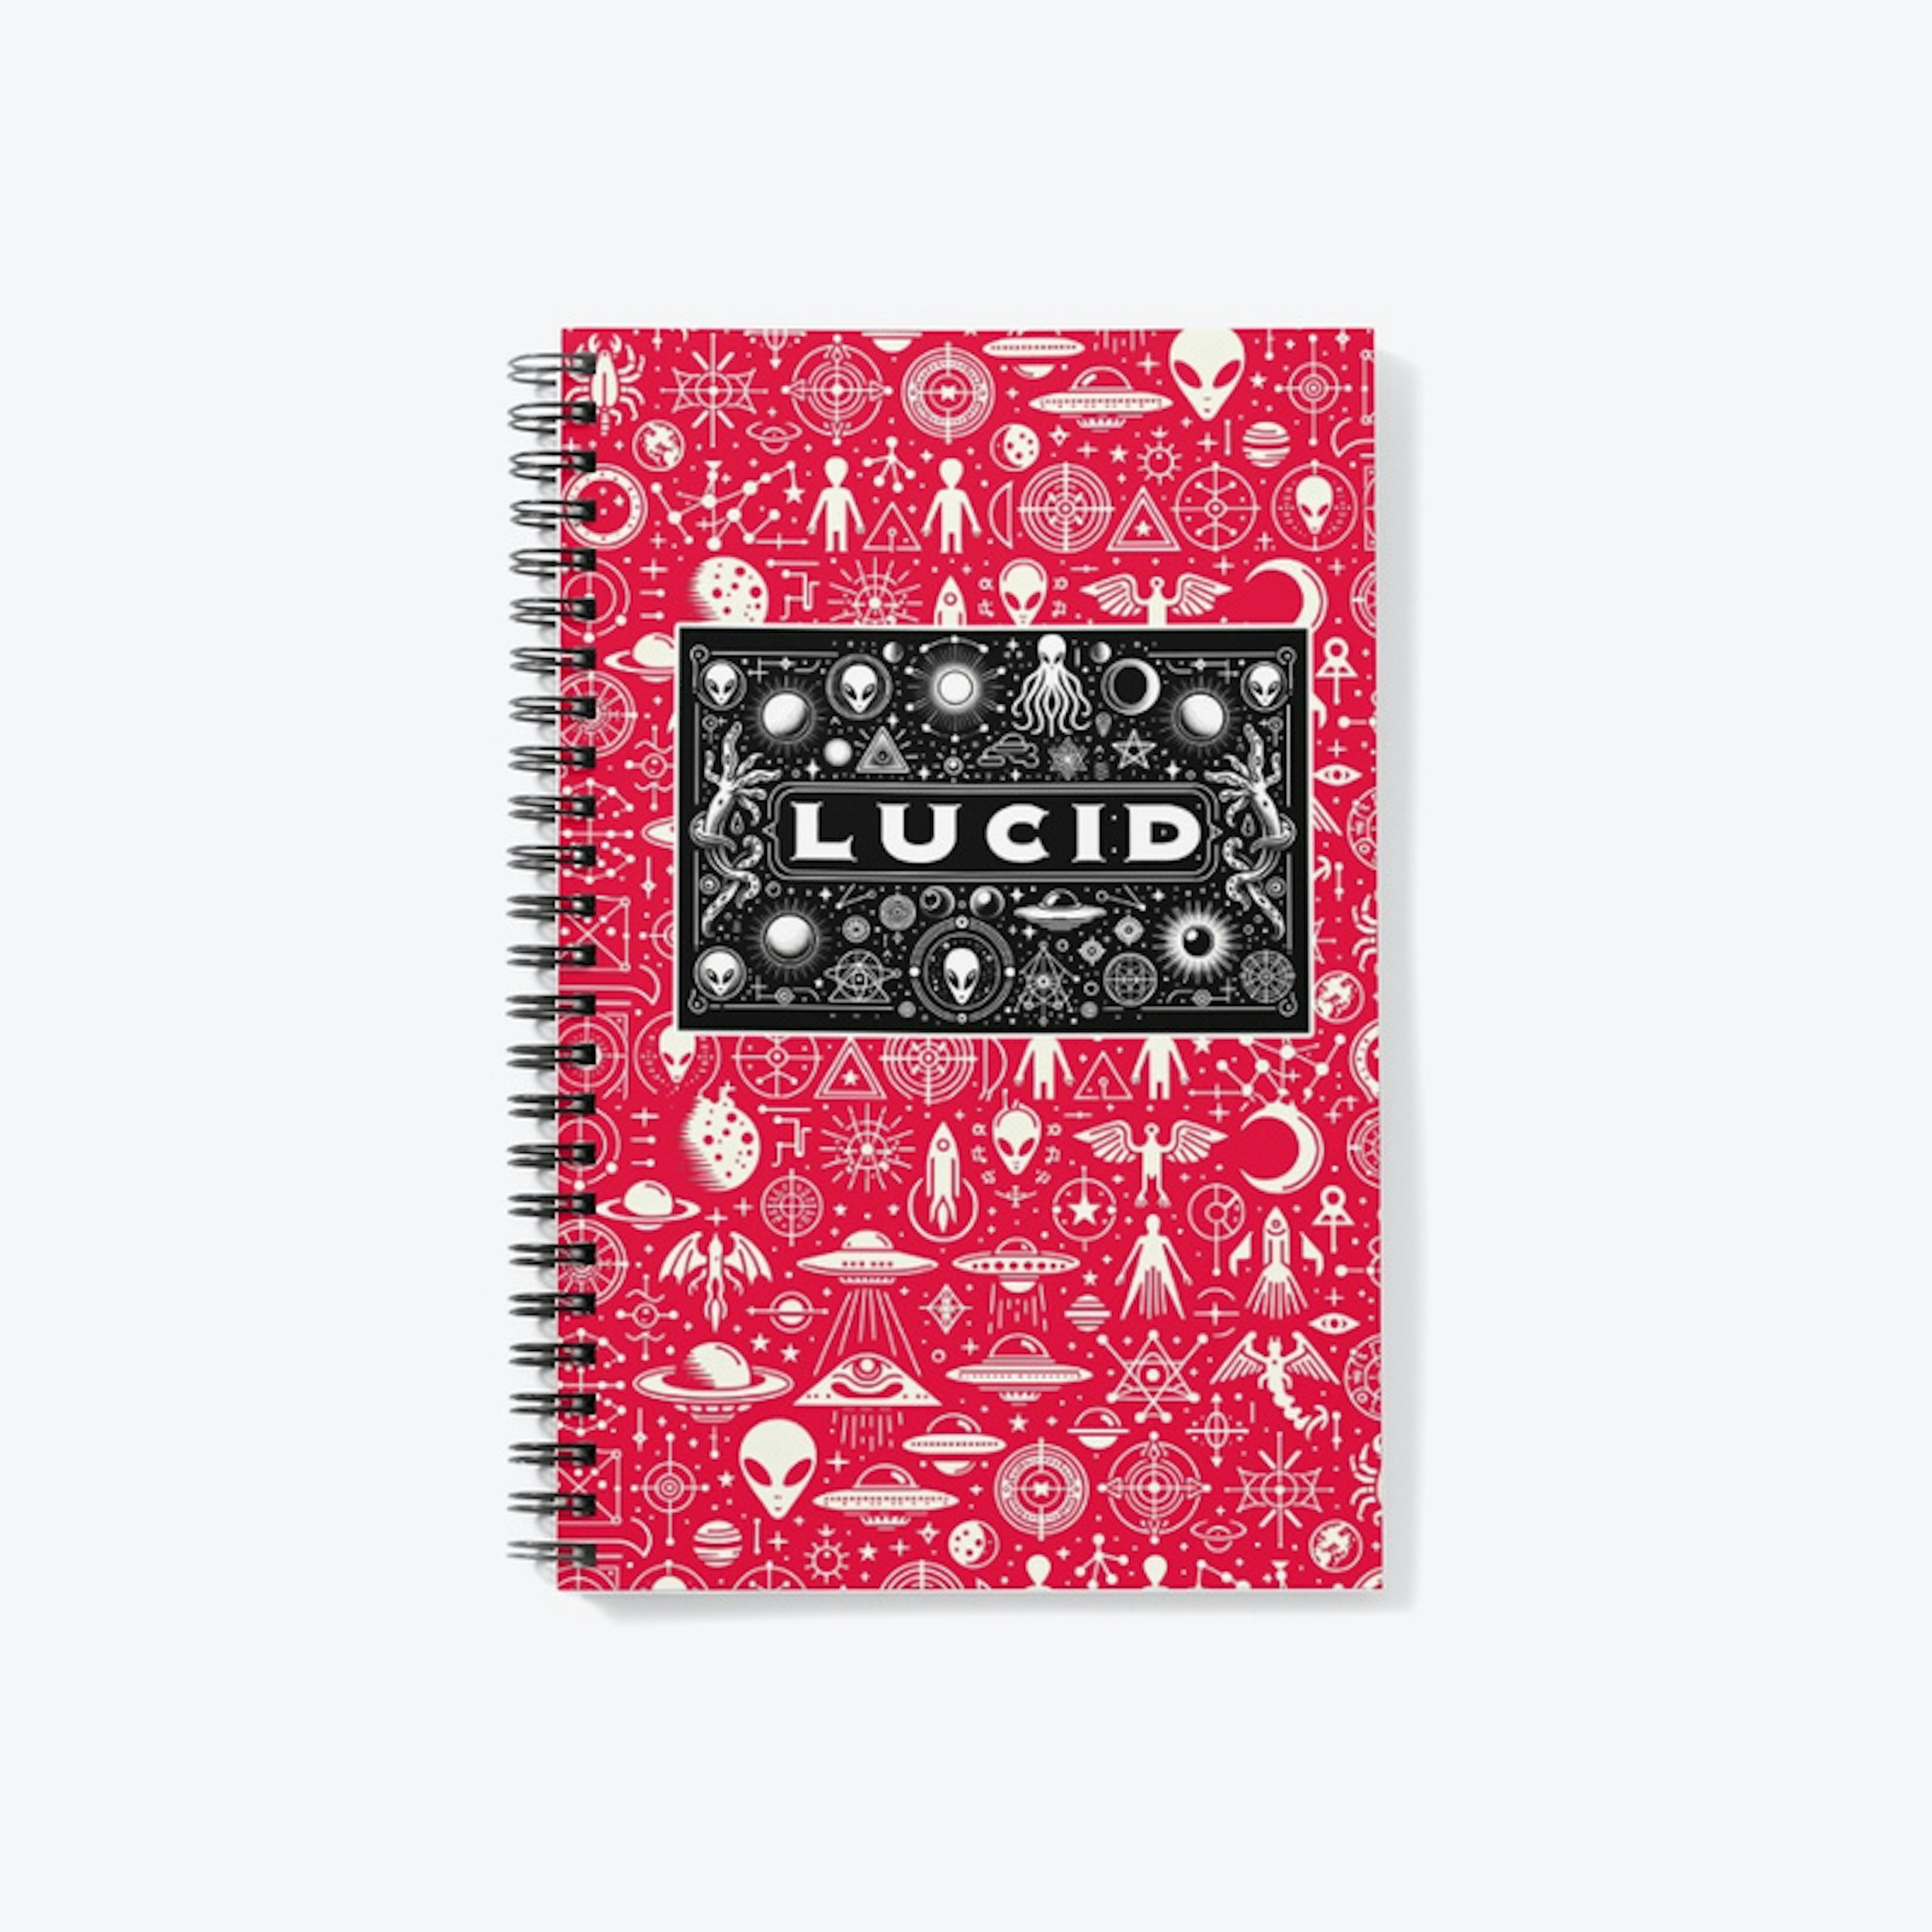 The Lucid Notebook